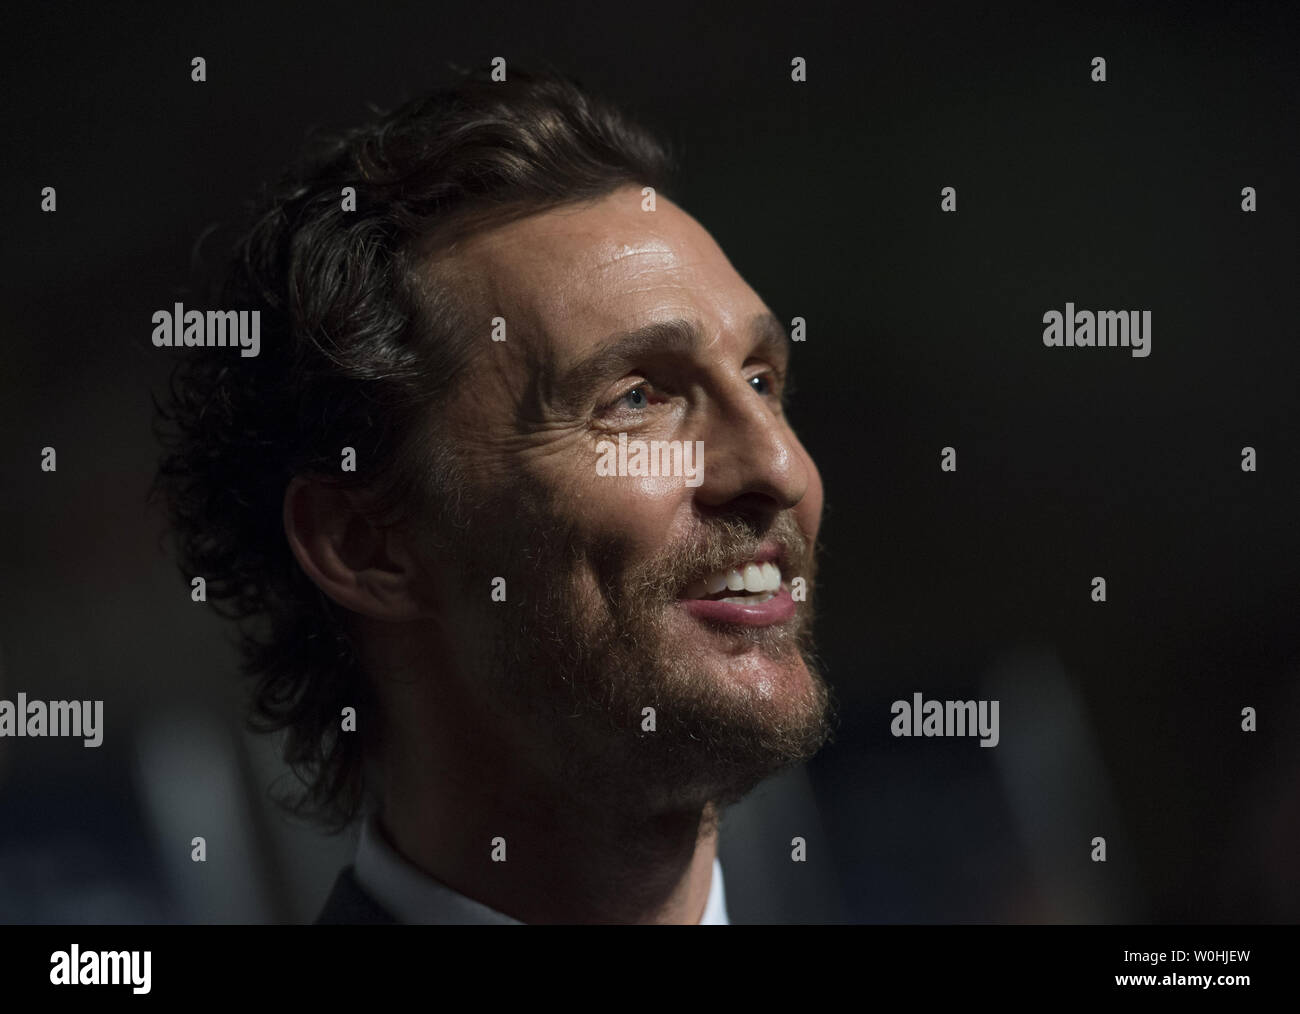 Matthew McConaughey arrives on the red carpet for the premier of the film "Interstellar" at Smithsonian's Air and Space Museum on the National Mall in Washington DC, November 5, 2014.  UPI/Molly Riley Stock Photo